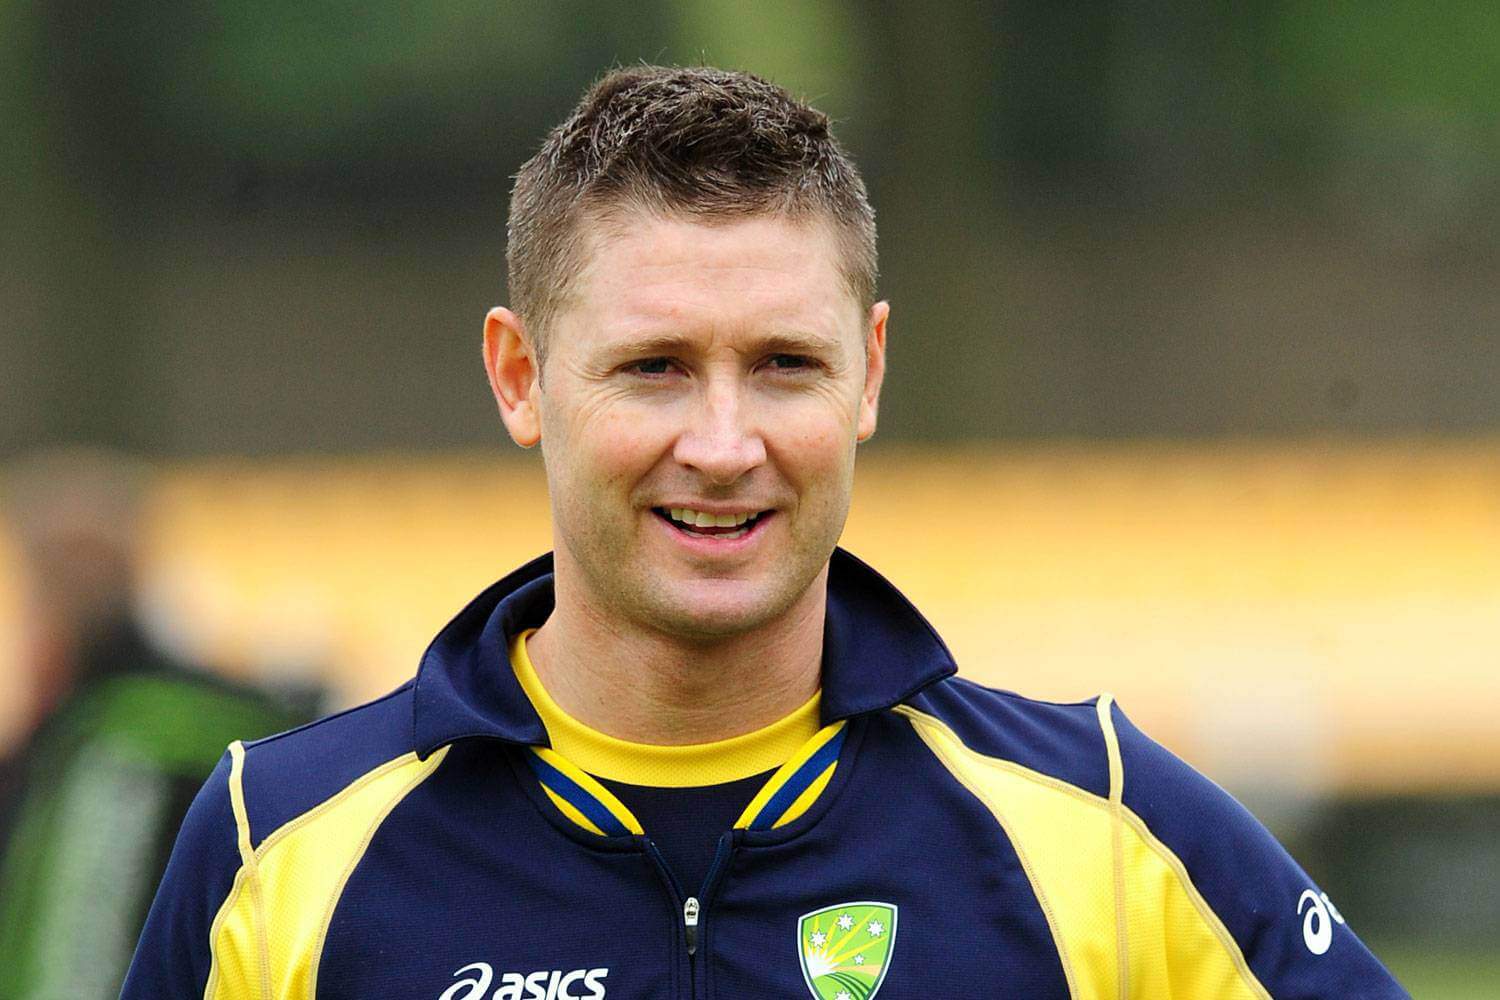 Cricket News: Michael Clarke says "With so much seniority in the team"